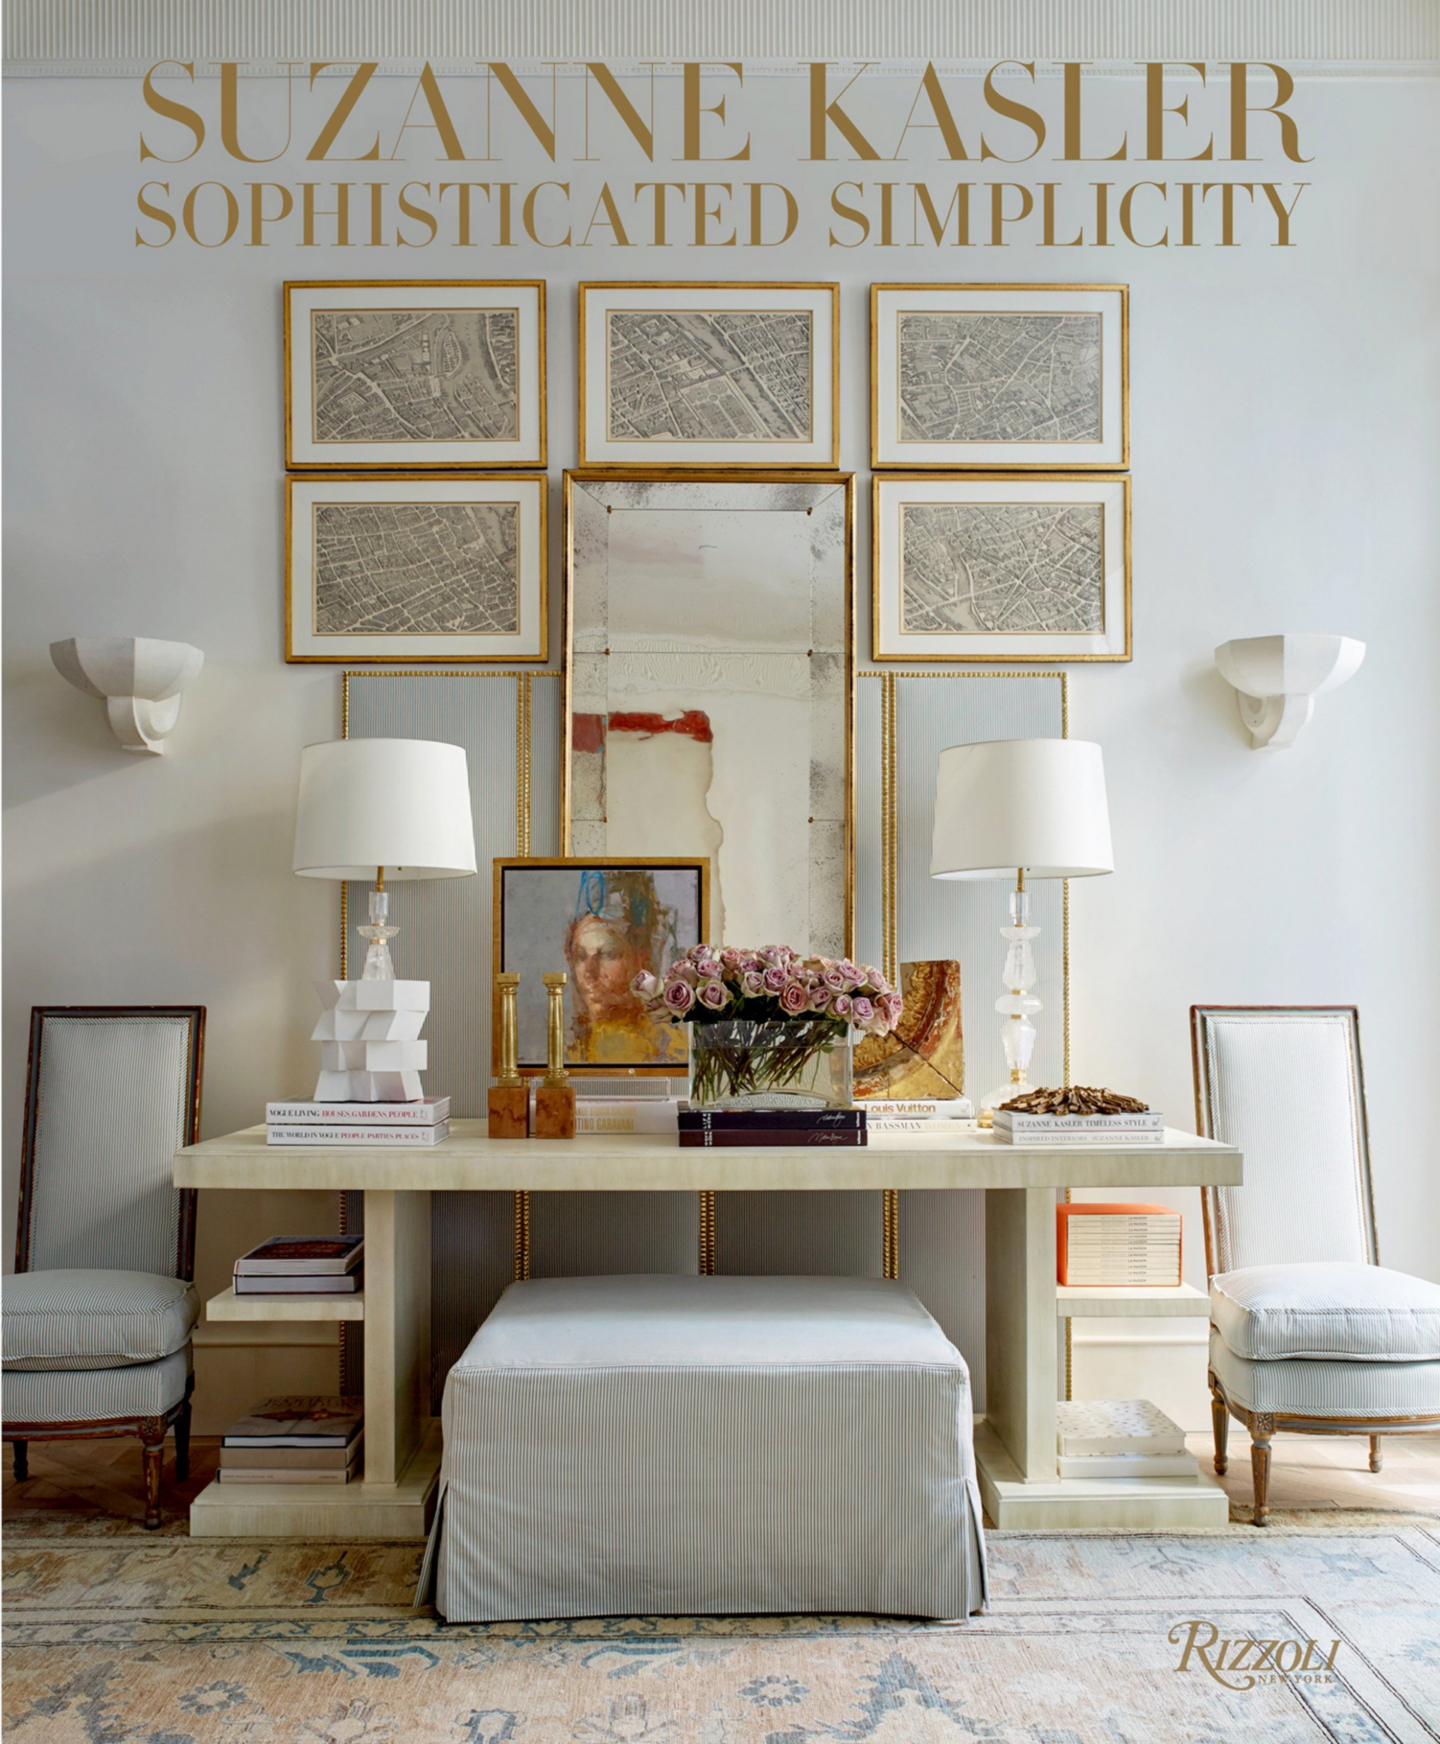 Sophisticated Simplicity (Rizzoli, 2018) by Suzanne Kasler